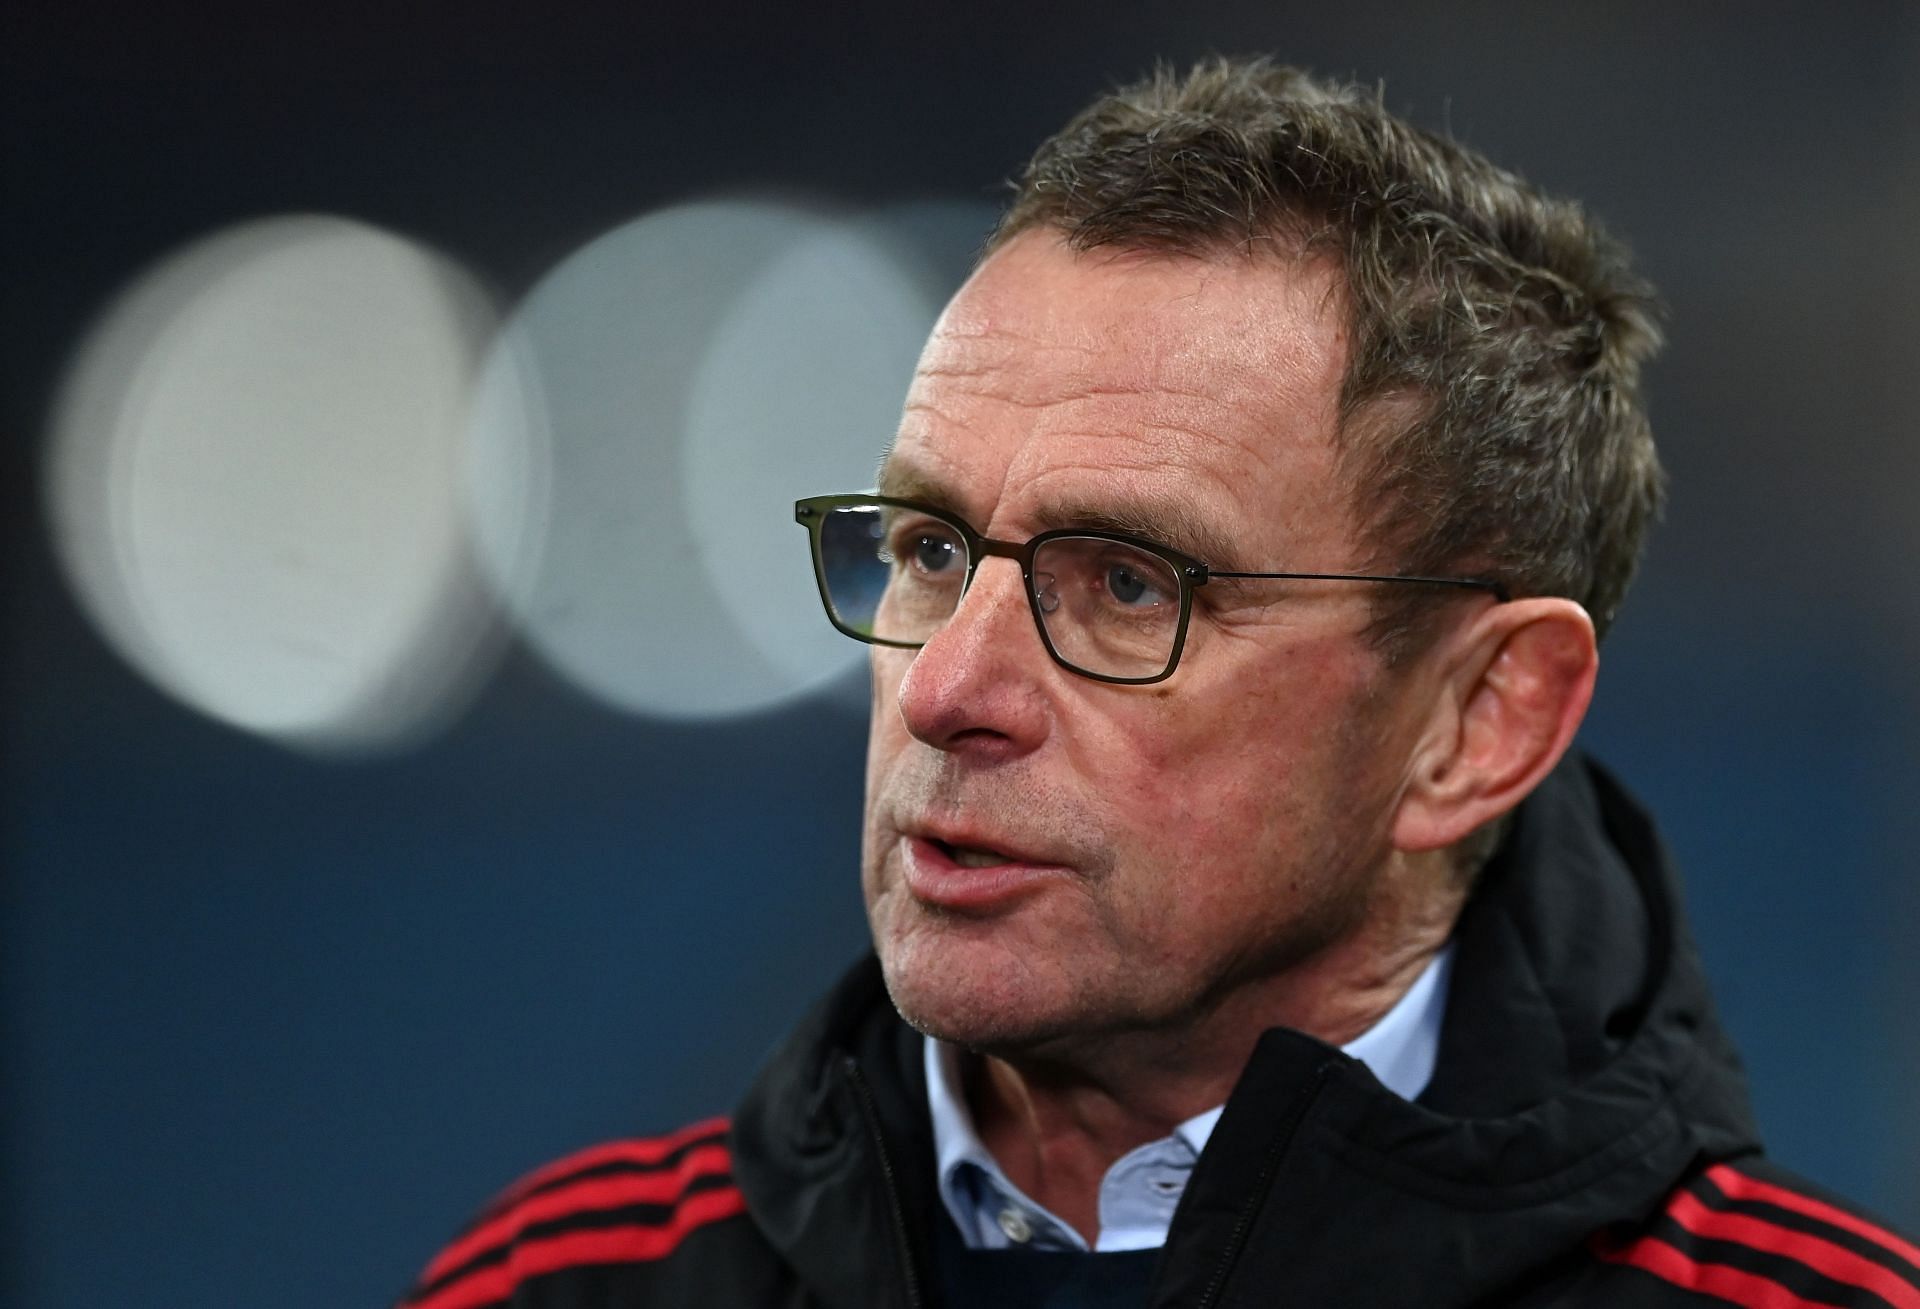 Manchester United intterim manager Ralf Rangnick